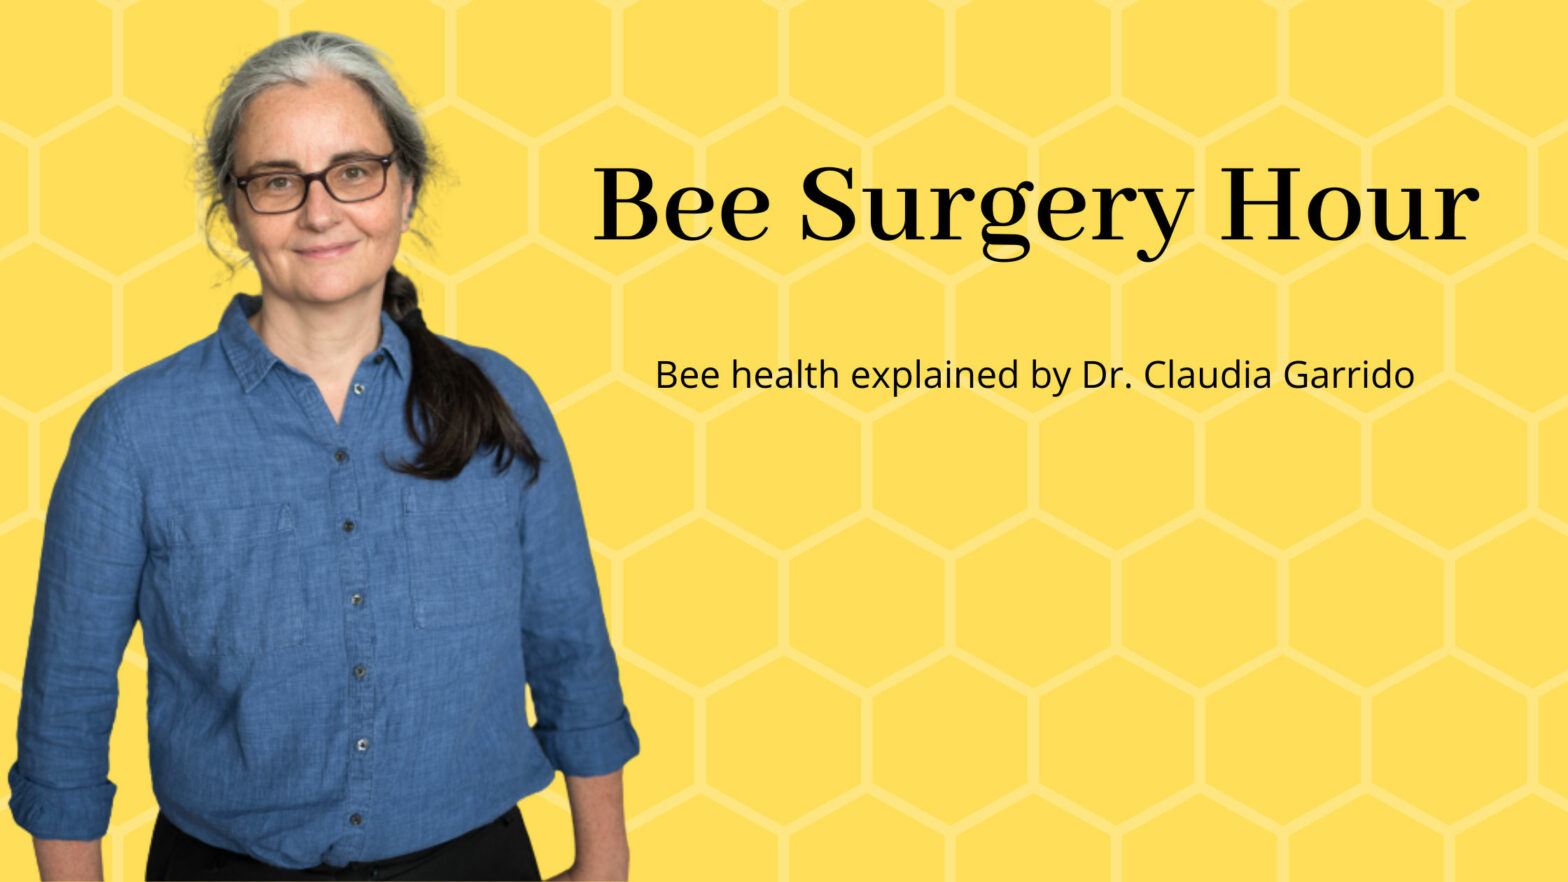 challenges for bee health, keeping healthy bees